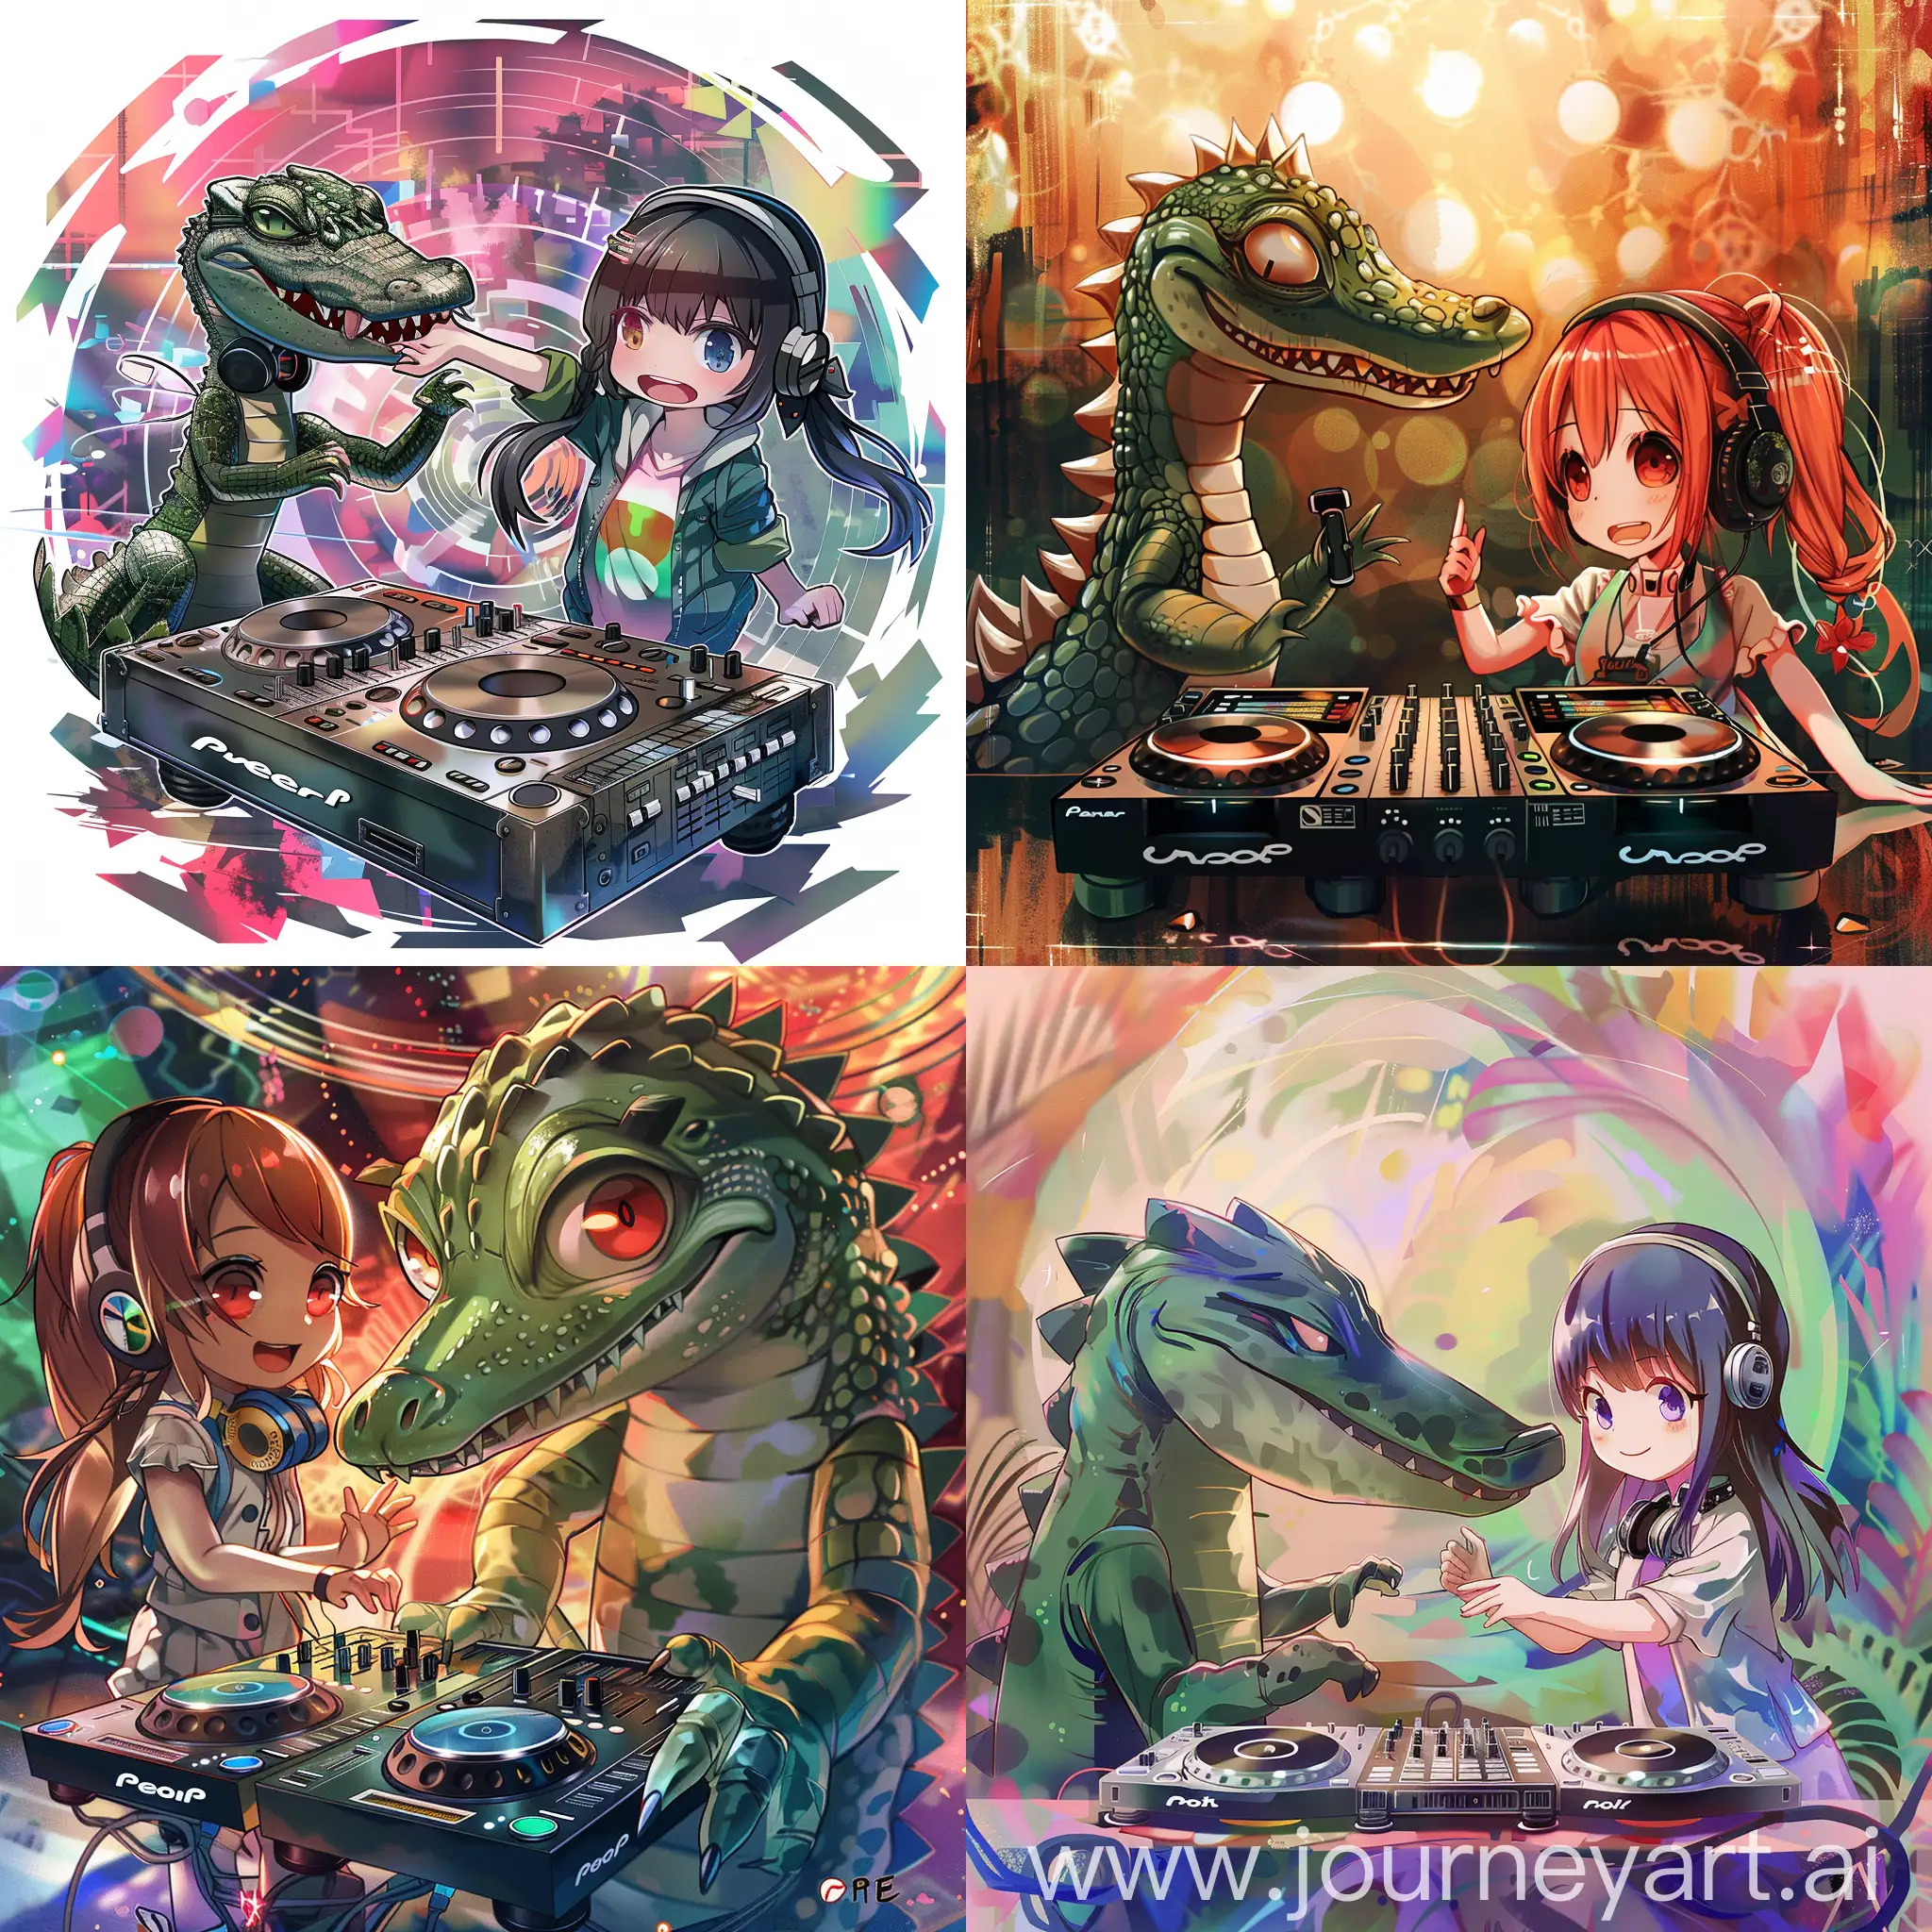 chibi aligator and anime girl playing dj, with abstract background, 